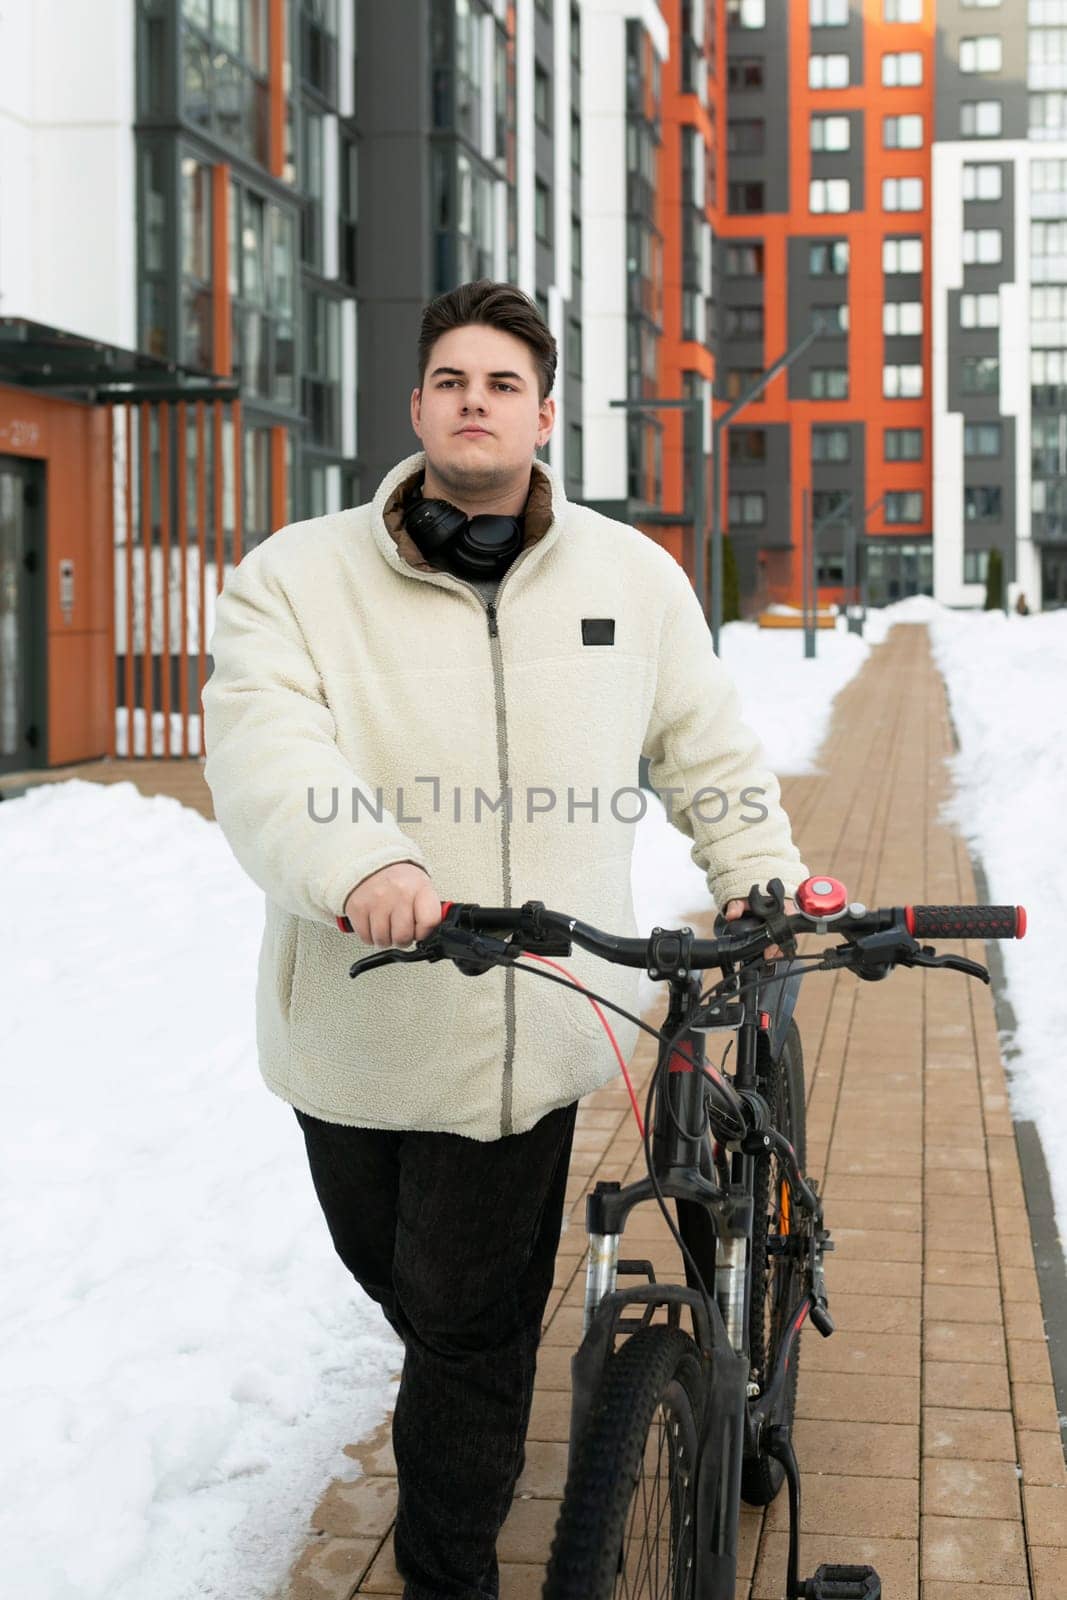 Lifestyle concept, young man rented a bicycle by TRMK